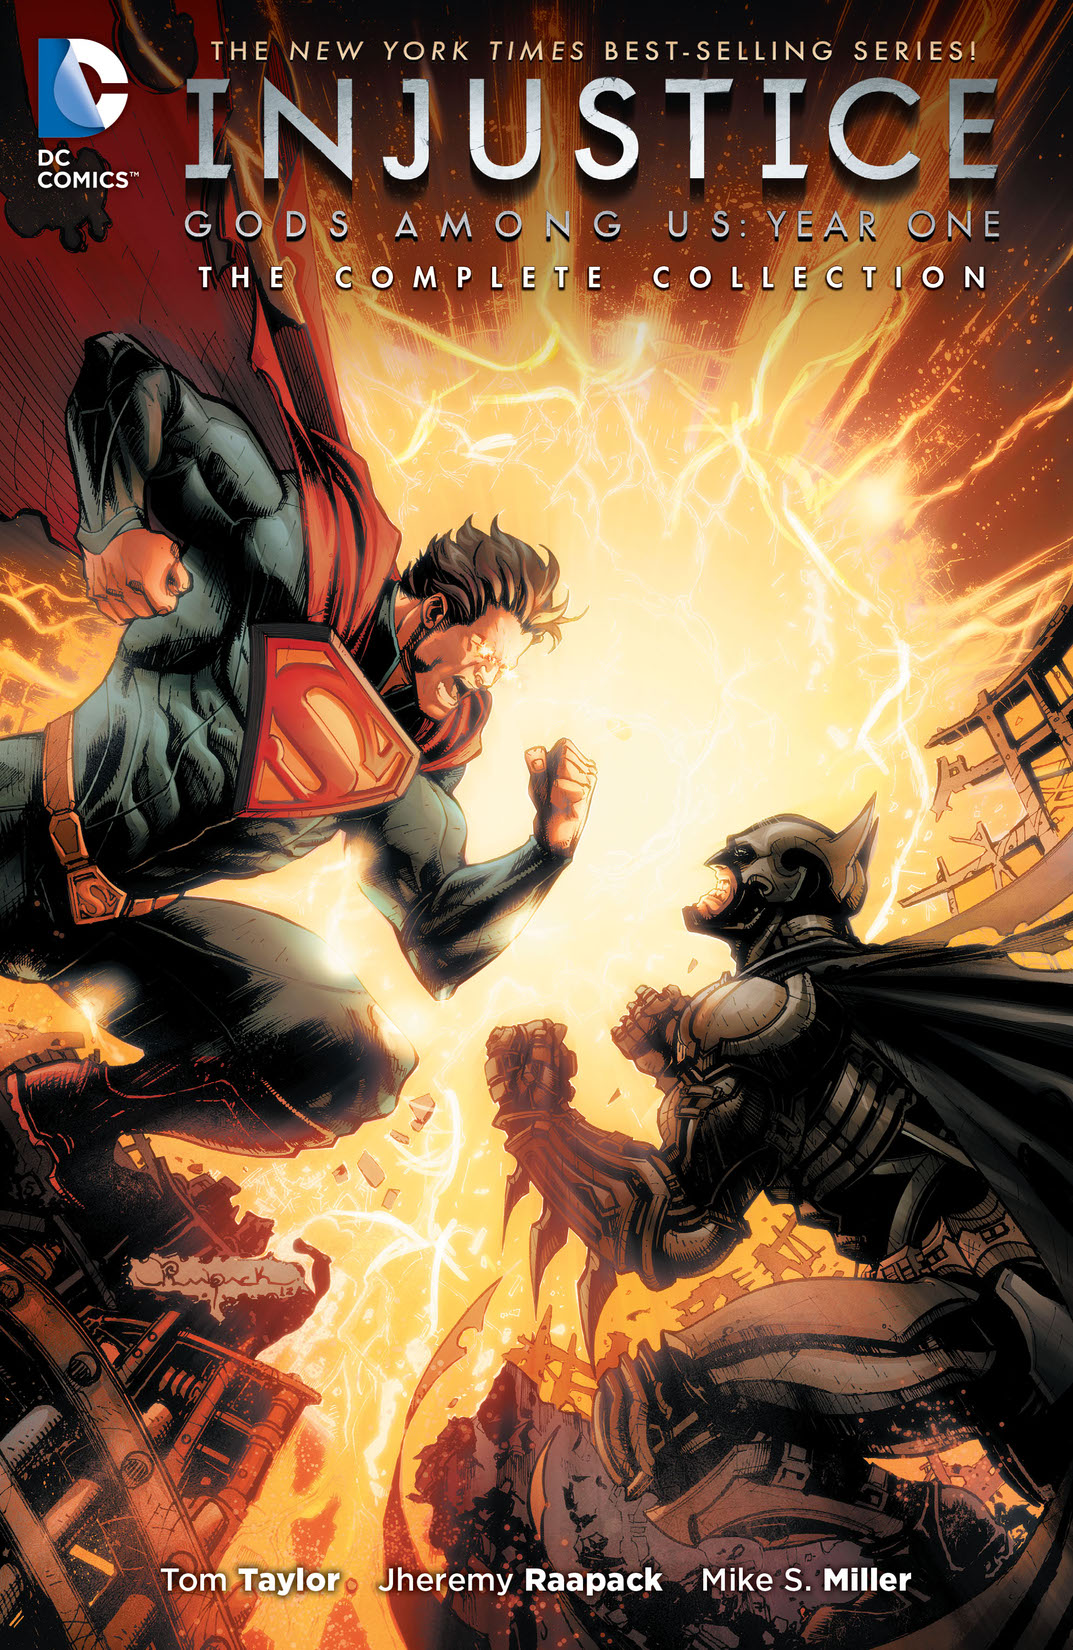 Injustice: Gods Among Us Year One - The Complete Collection preview images